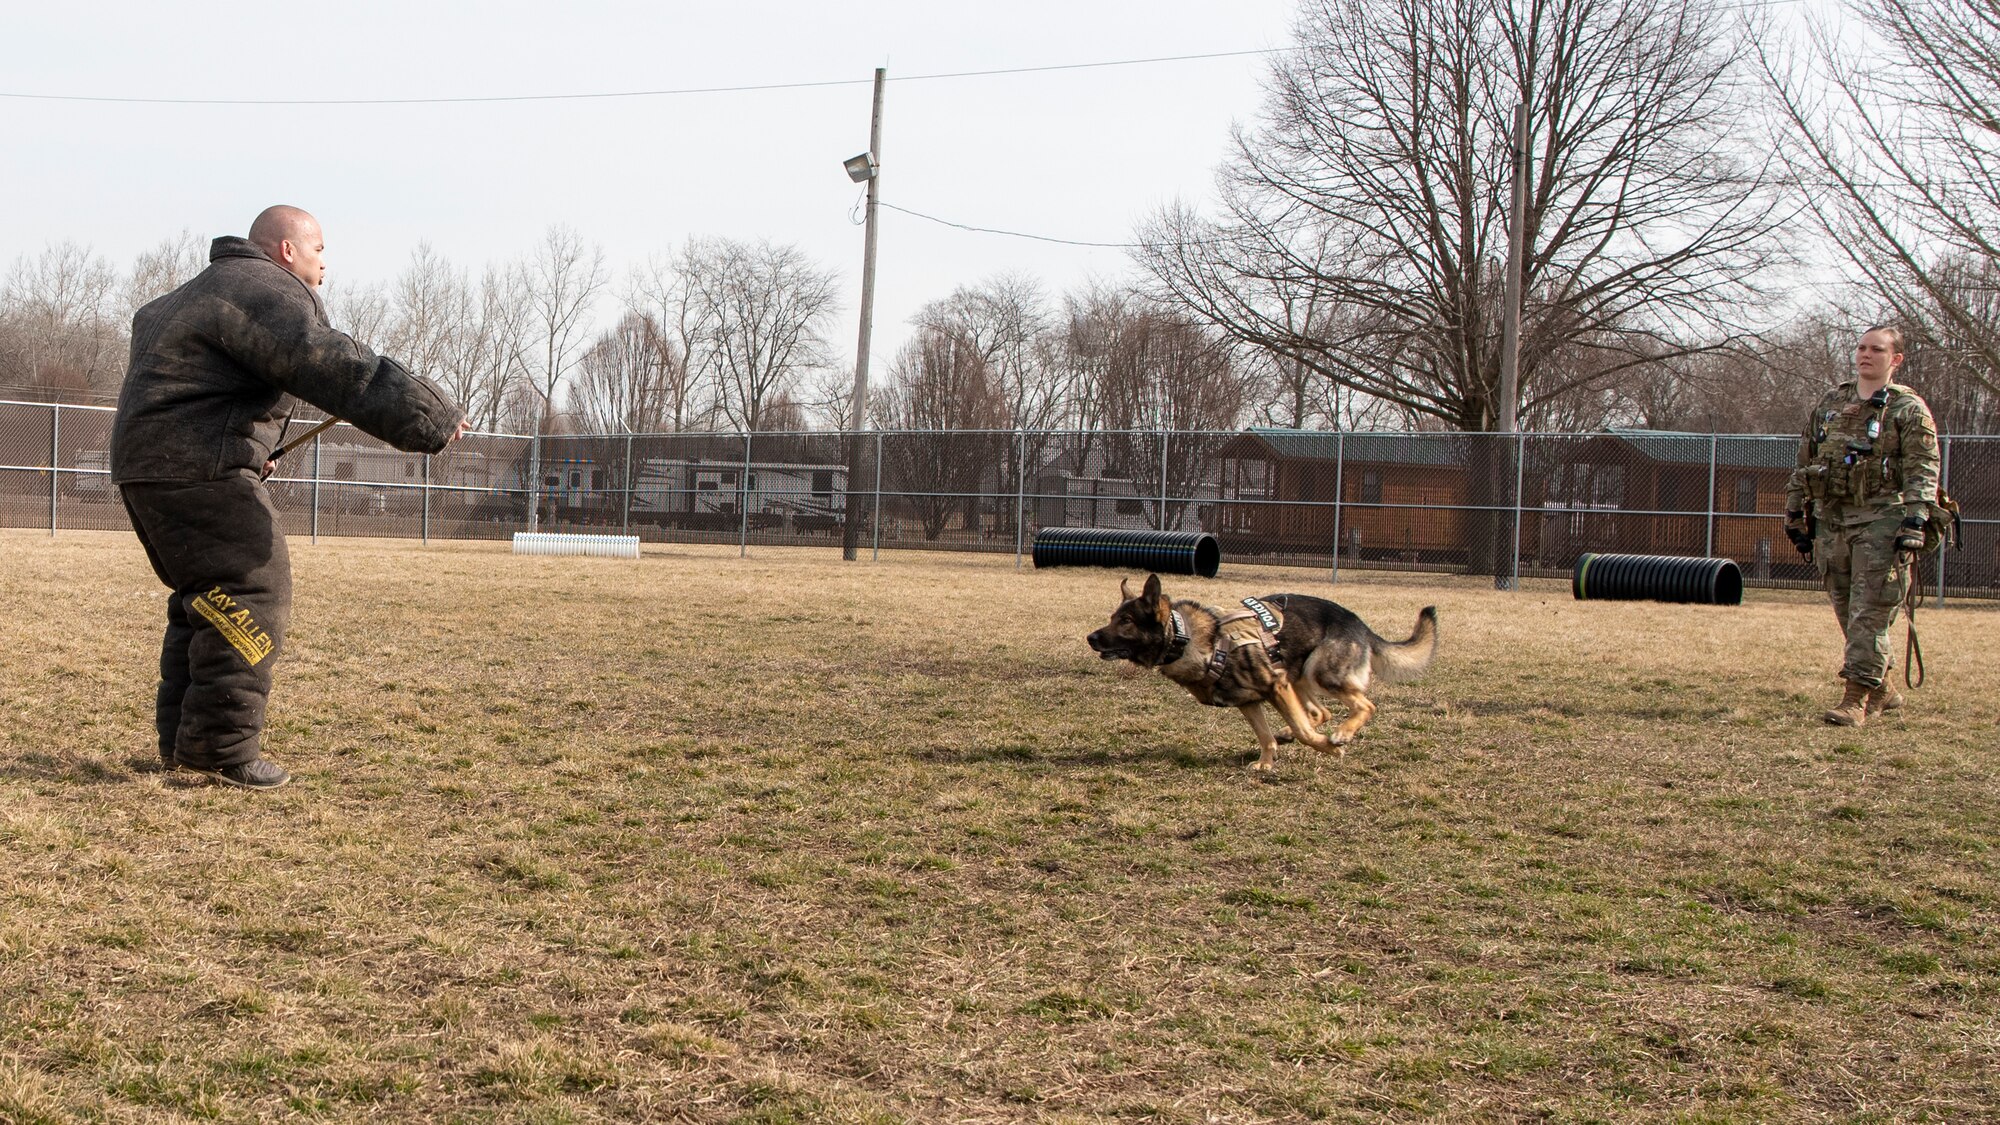 Military Working Dog Flex looks up at his handler